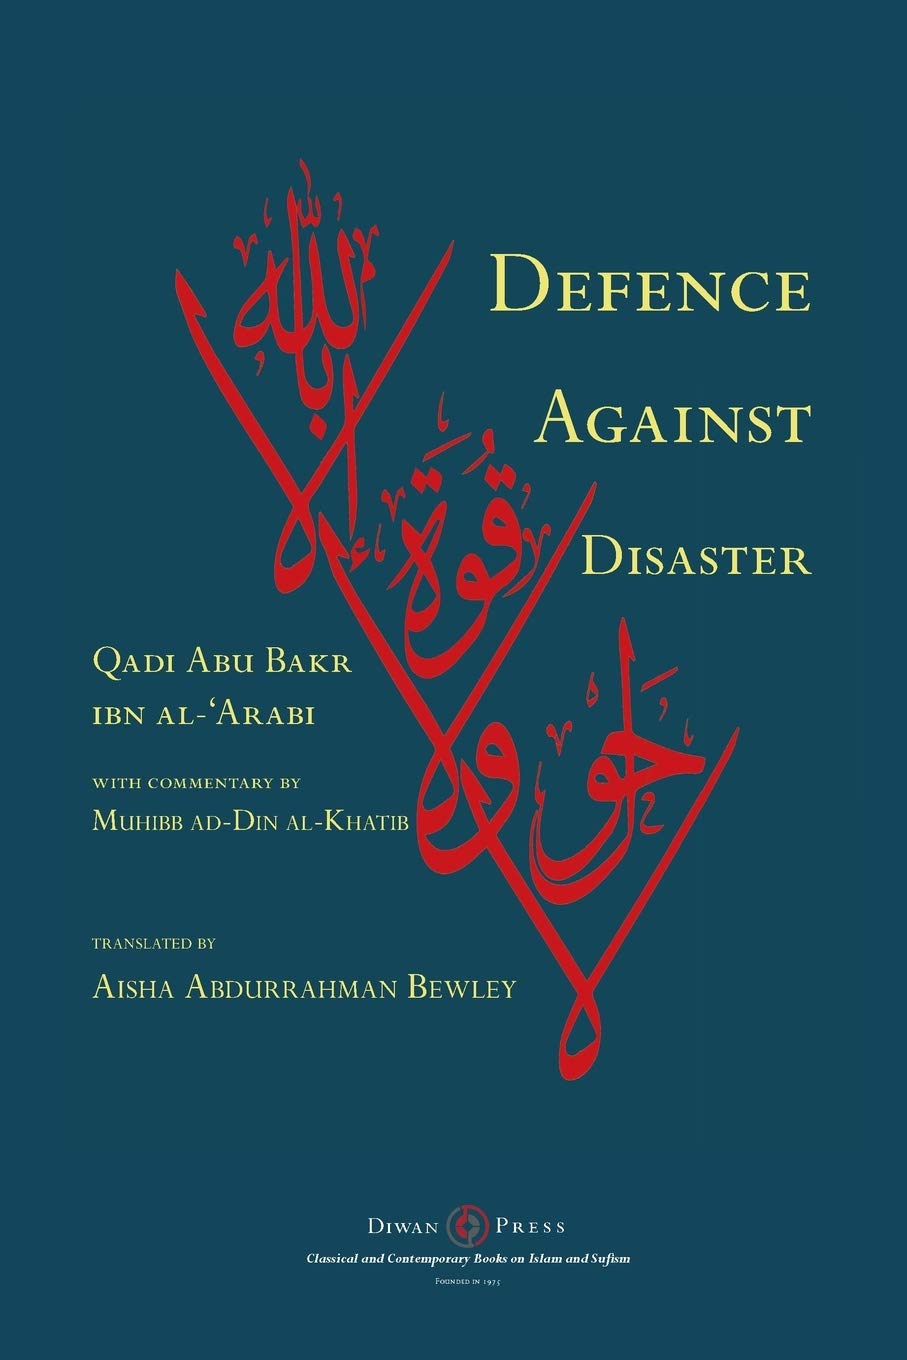 Defence Against Disaster: in Accurately Determining the Positions of the Companions after the Death of the Prophet - Abu Bakr Ibn al-'Arabi (Author), Muhibb ad-Din Al-Khatib (Commentary), Aisha Abdurrahman Bewley (Translator) [Hardcover]